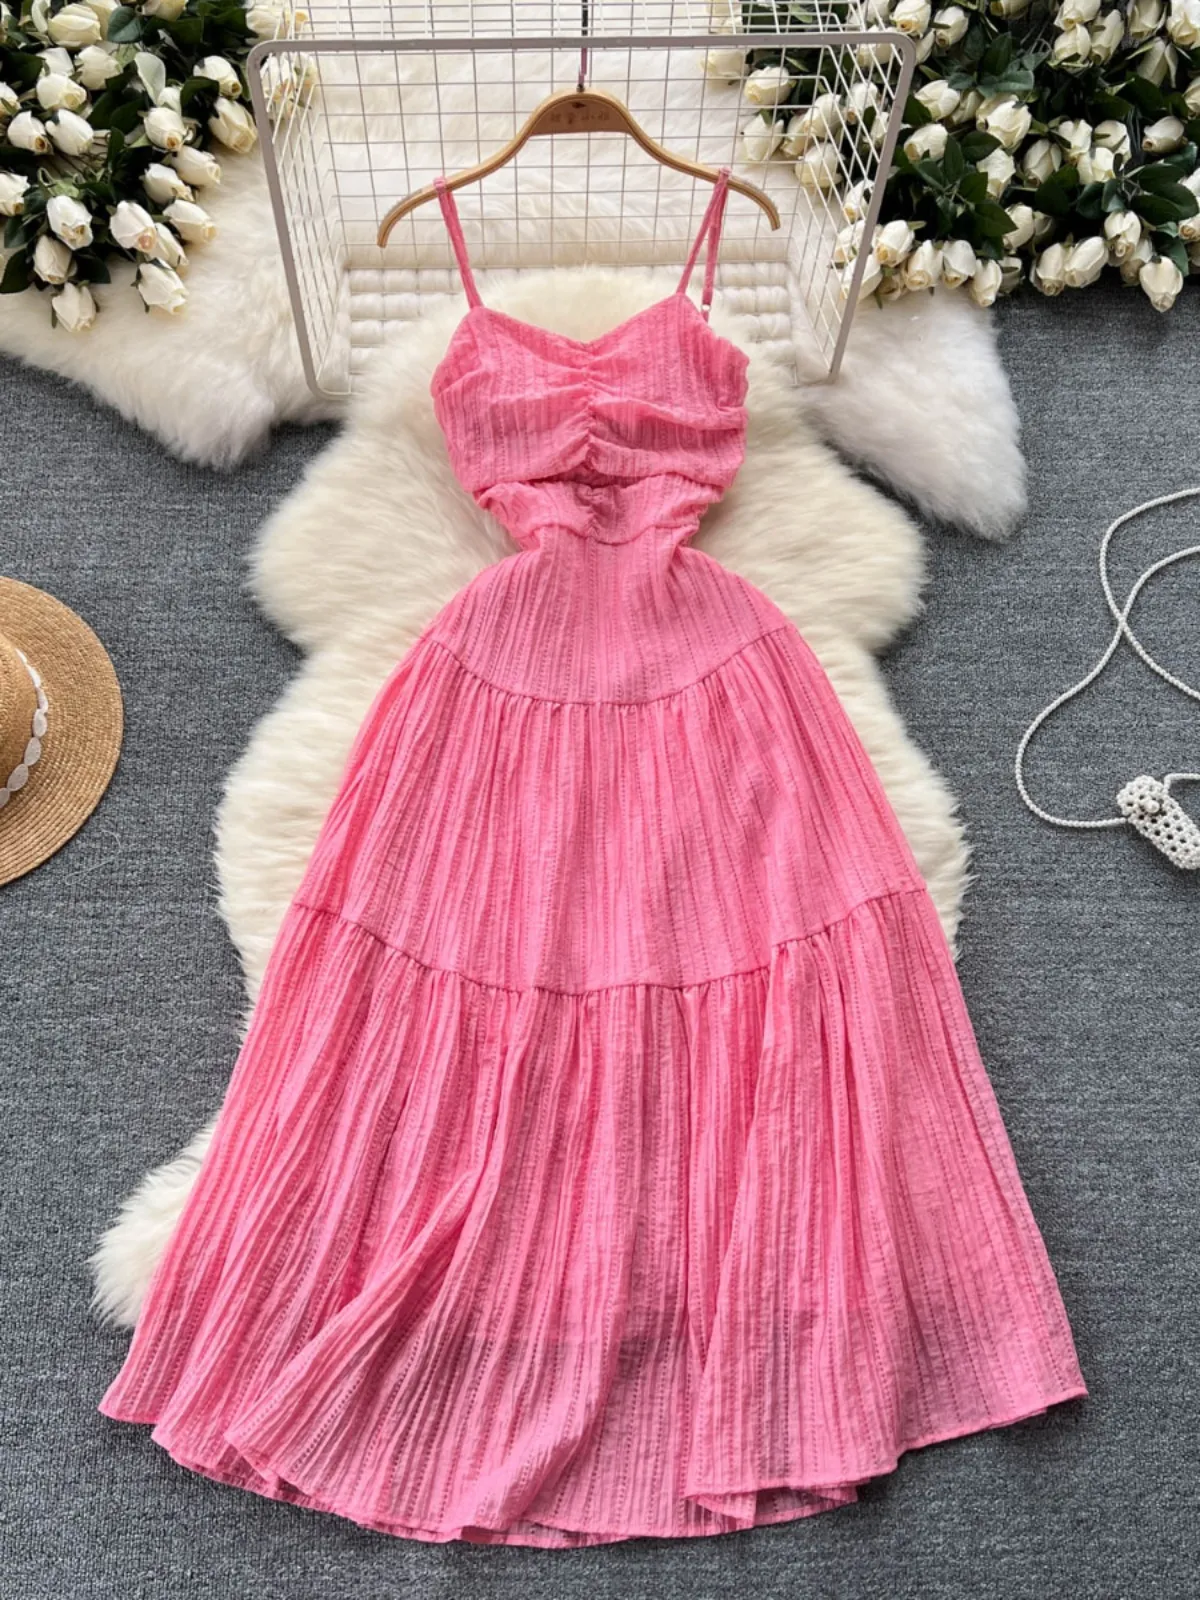 Sweet and Spicy Girl's Vacation Instagram Strap Beach Skirt with Heart Craft Hollow out Tie Strap Waist Collection Super Immortal Pink Dress